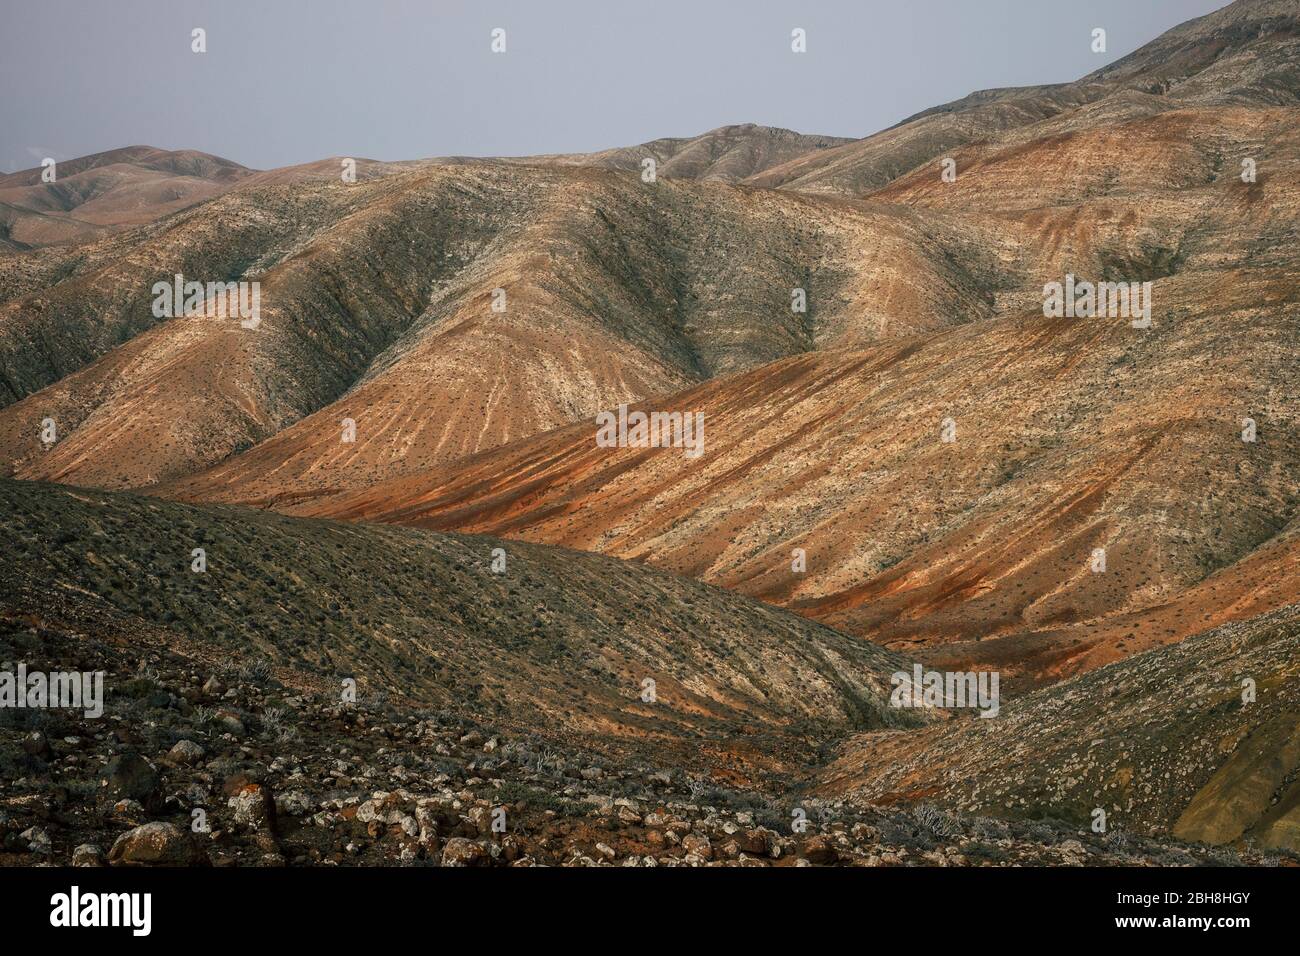 Mountains landscape with vulcans and brown ground - perfect place for trekking and discover new scenic places - africa furteventura desert arid climate change concept Stock Photo